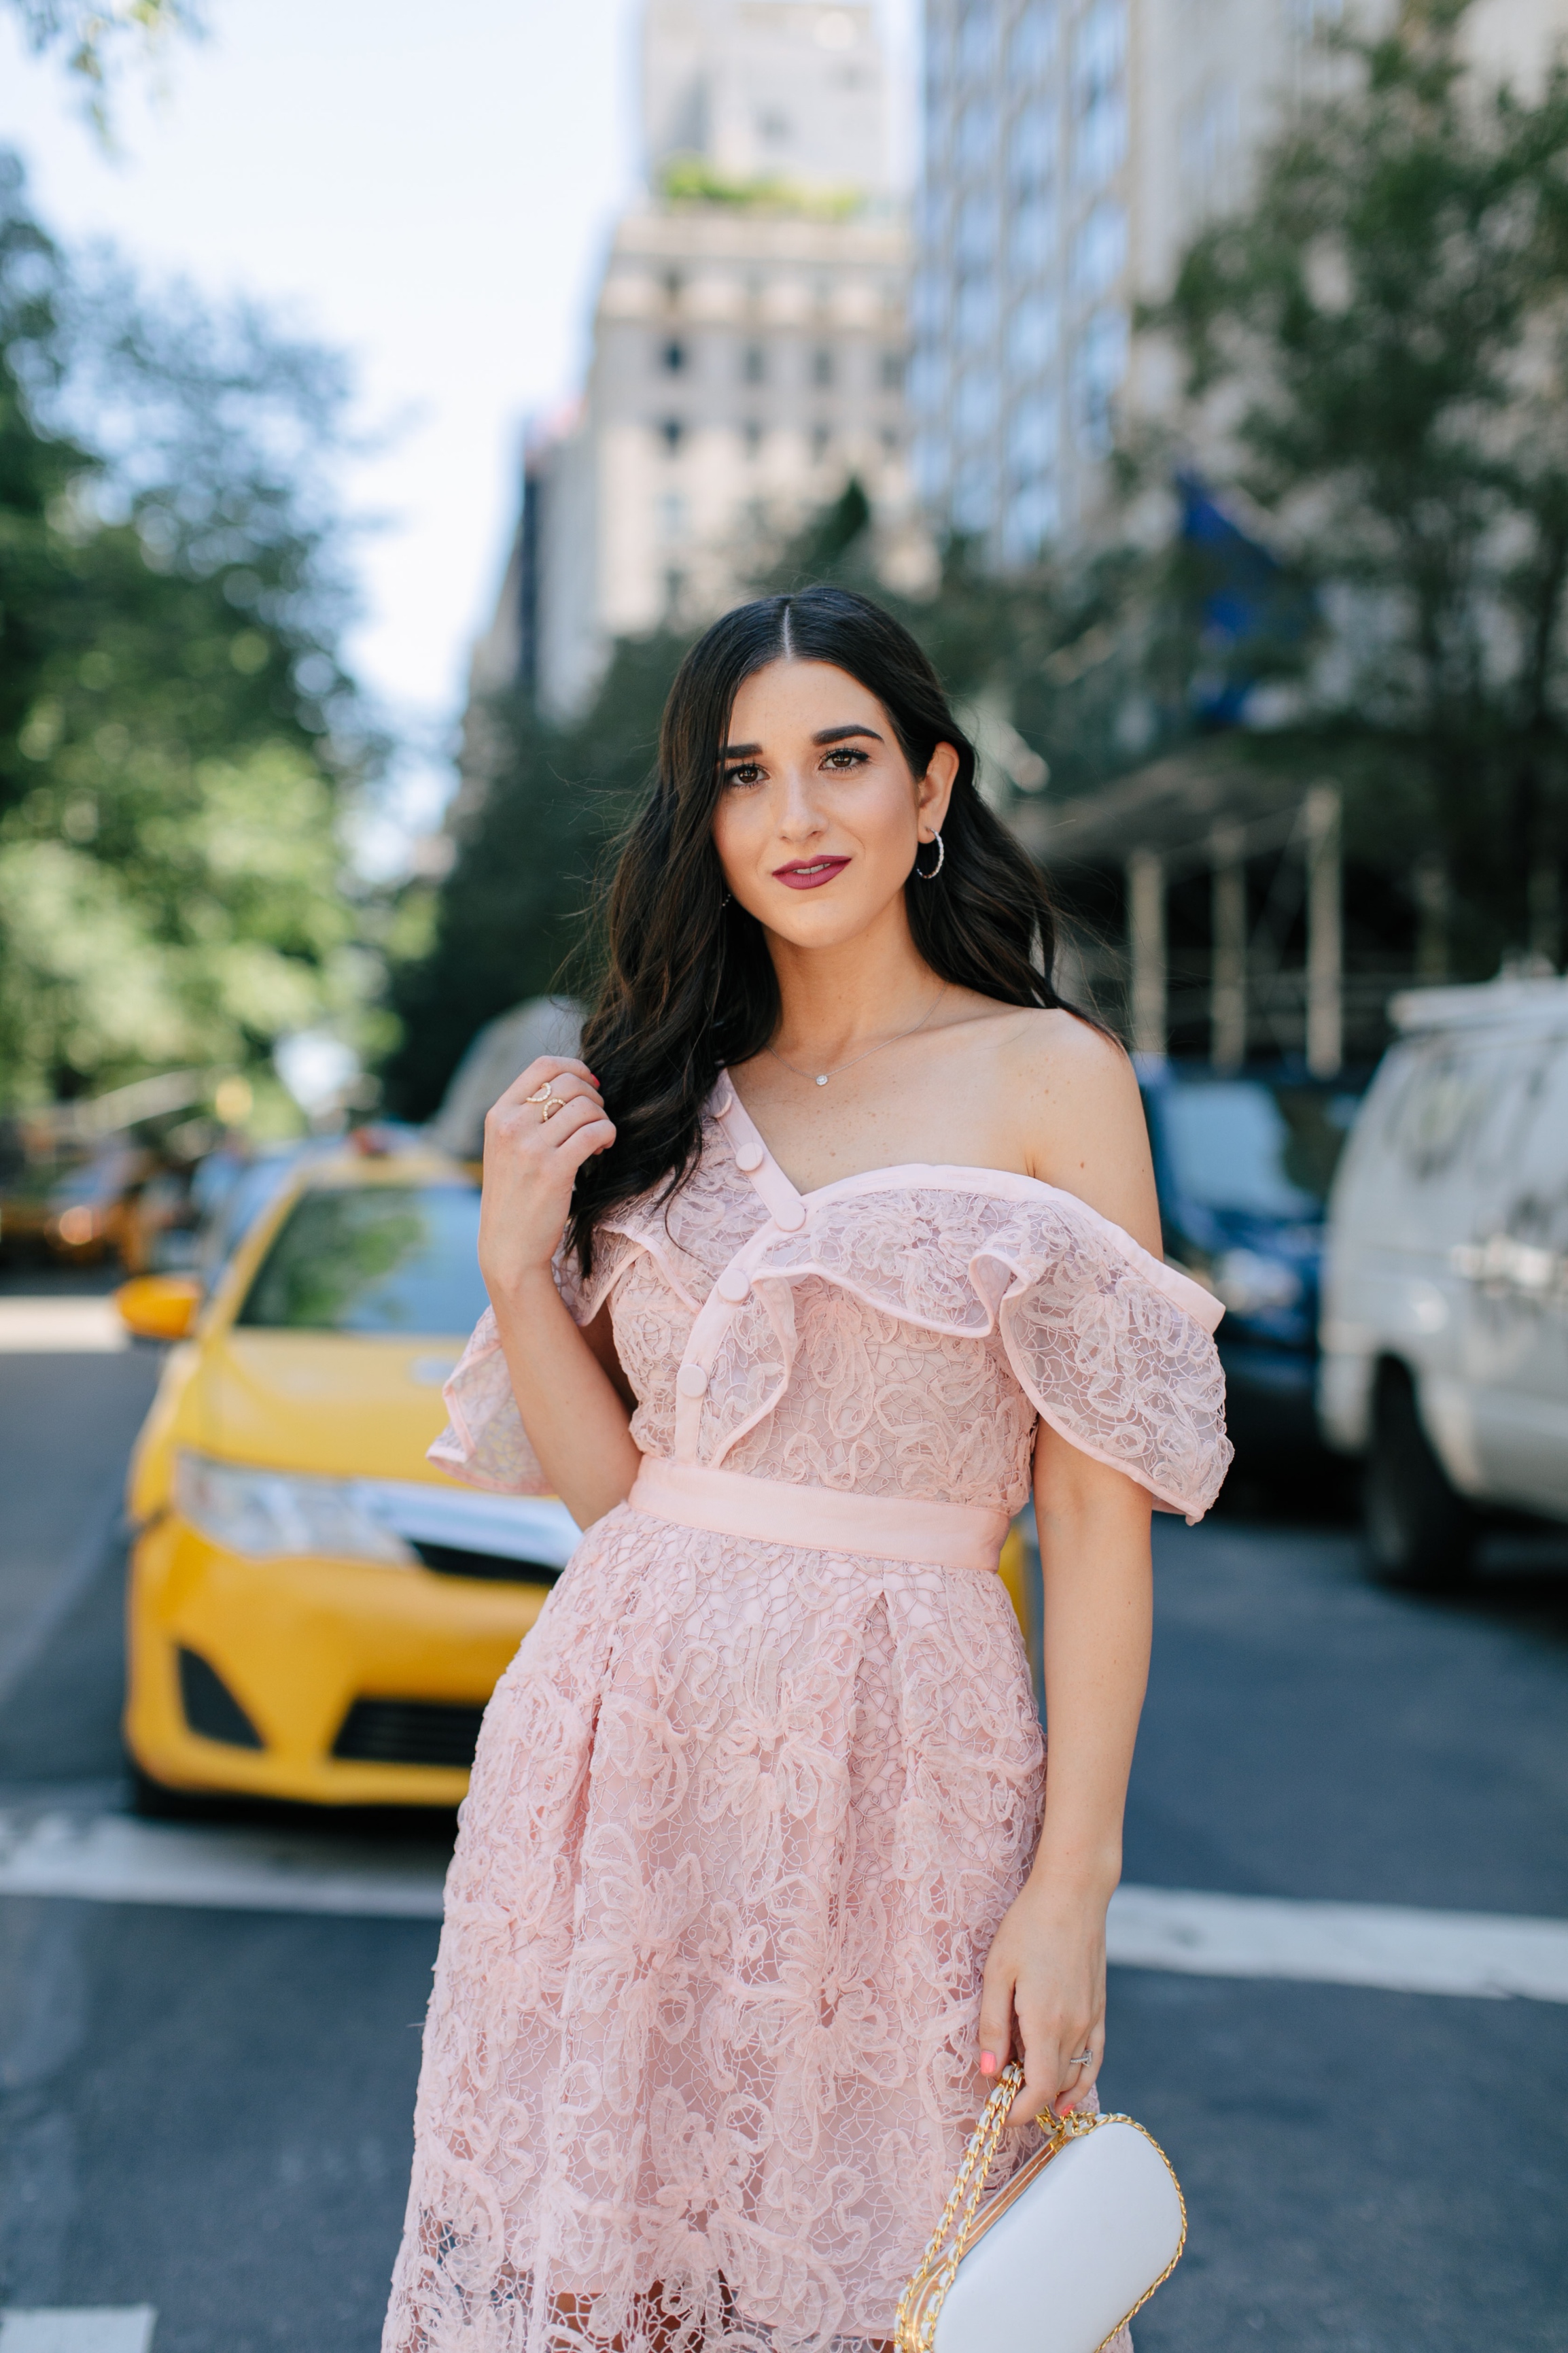 A New Perspective On Instagram Jealousy Pink Lace Dress Ivory Bow Heels Esther Santer Fashion Blog NYC Street Style Blogger Outfit OOTD Trendy White Bag Clutch Self Portrait Designer Kate Spade Wedding Shoes Fancy Elegant Feminine Shopping Wear Formal.jpg